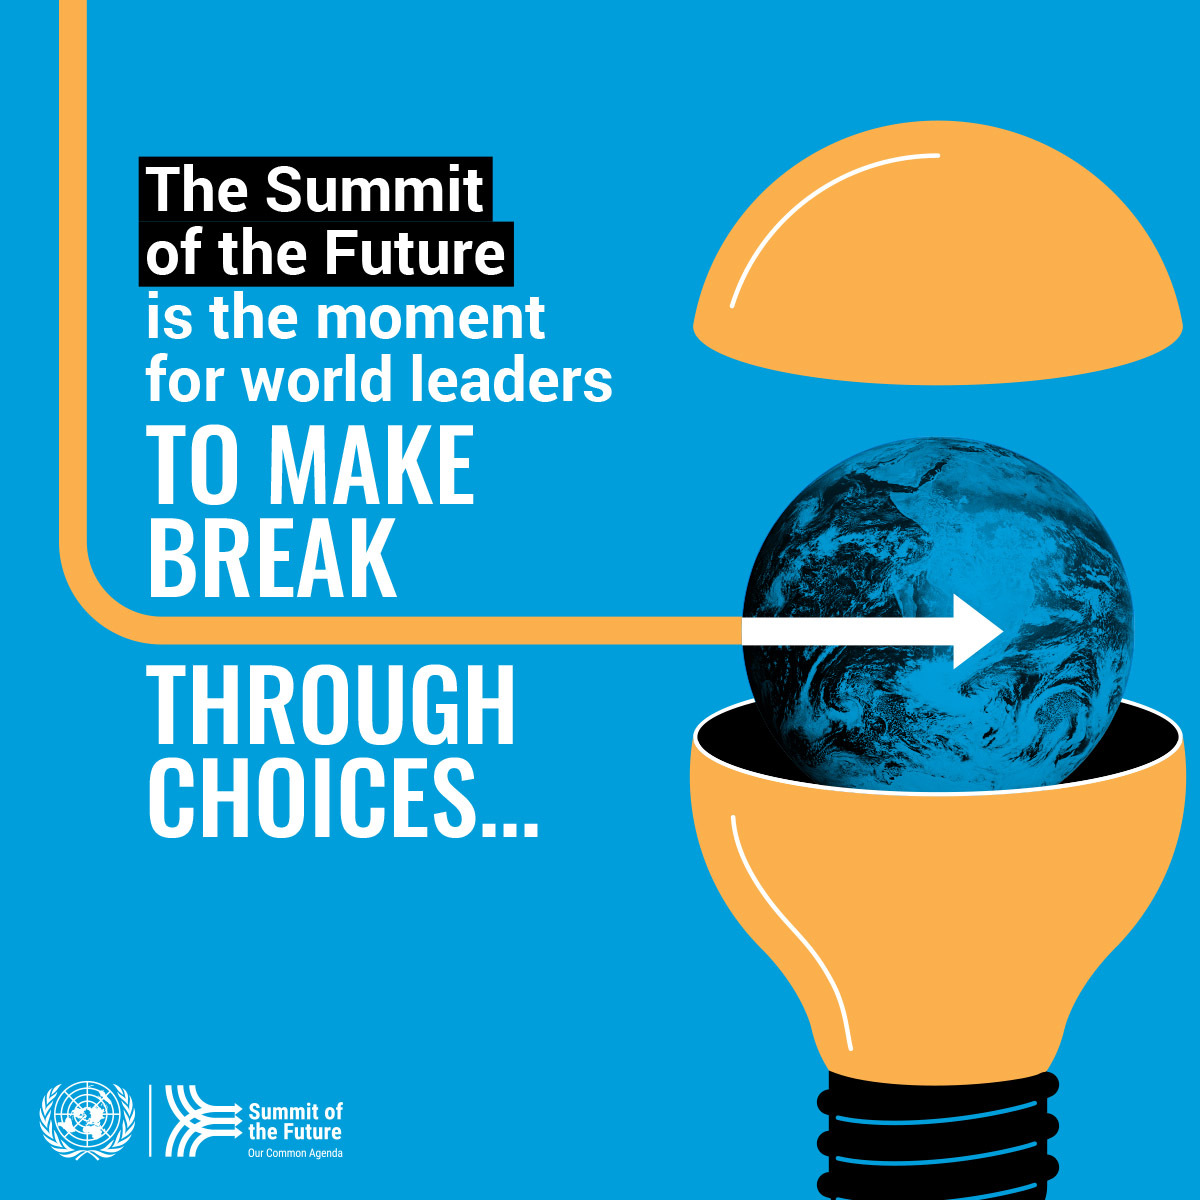 The Summit of the Future is the moment for leaders to make breakthrough choices for some of the biggest challenges facing the world today. Learn what's on the agenda for this crucial opportunity to shape #OurCommonFuture. bit.ly/SotF2024